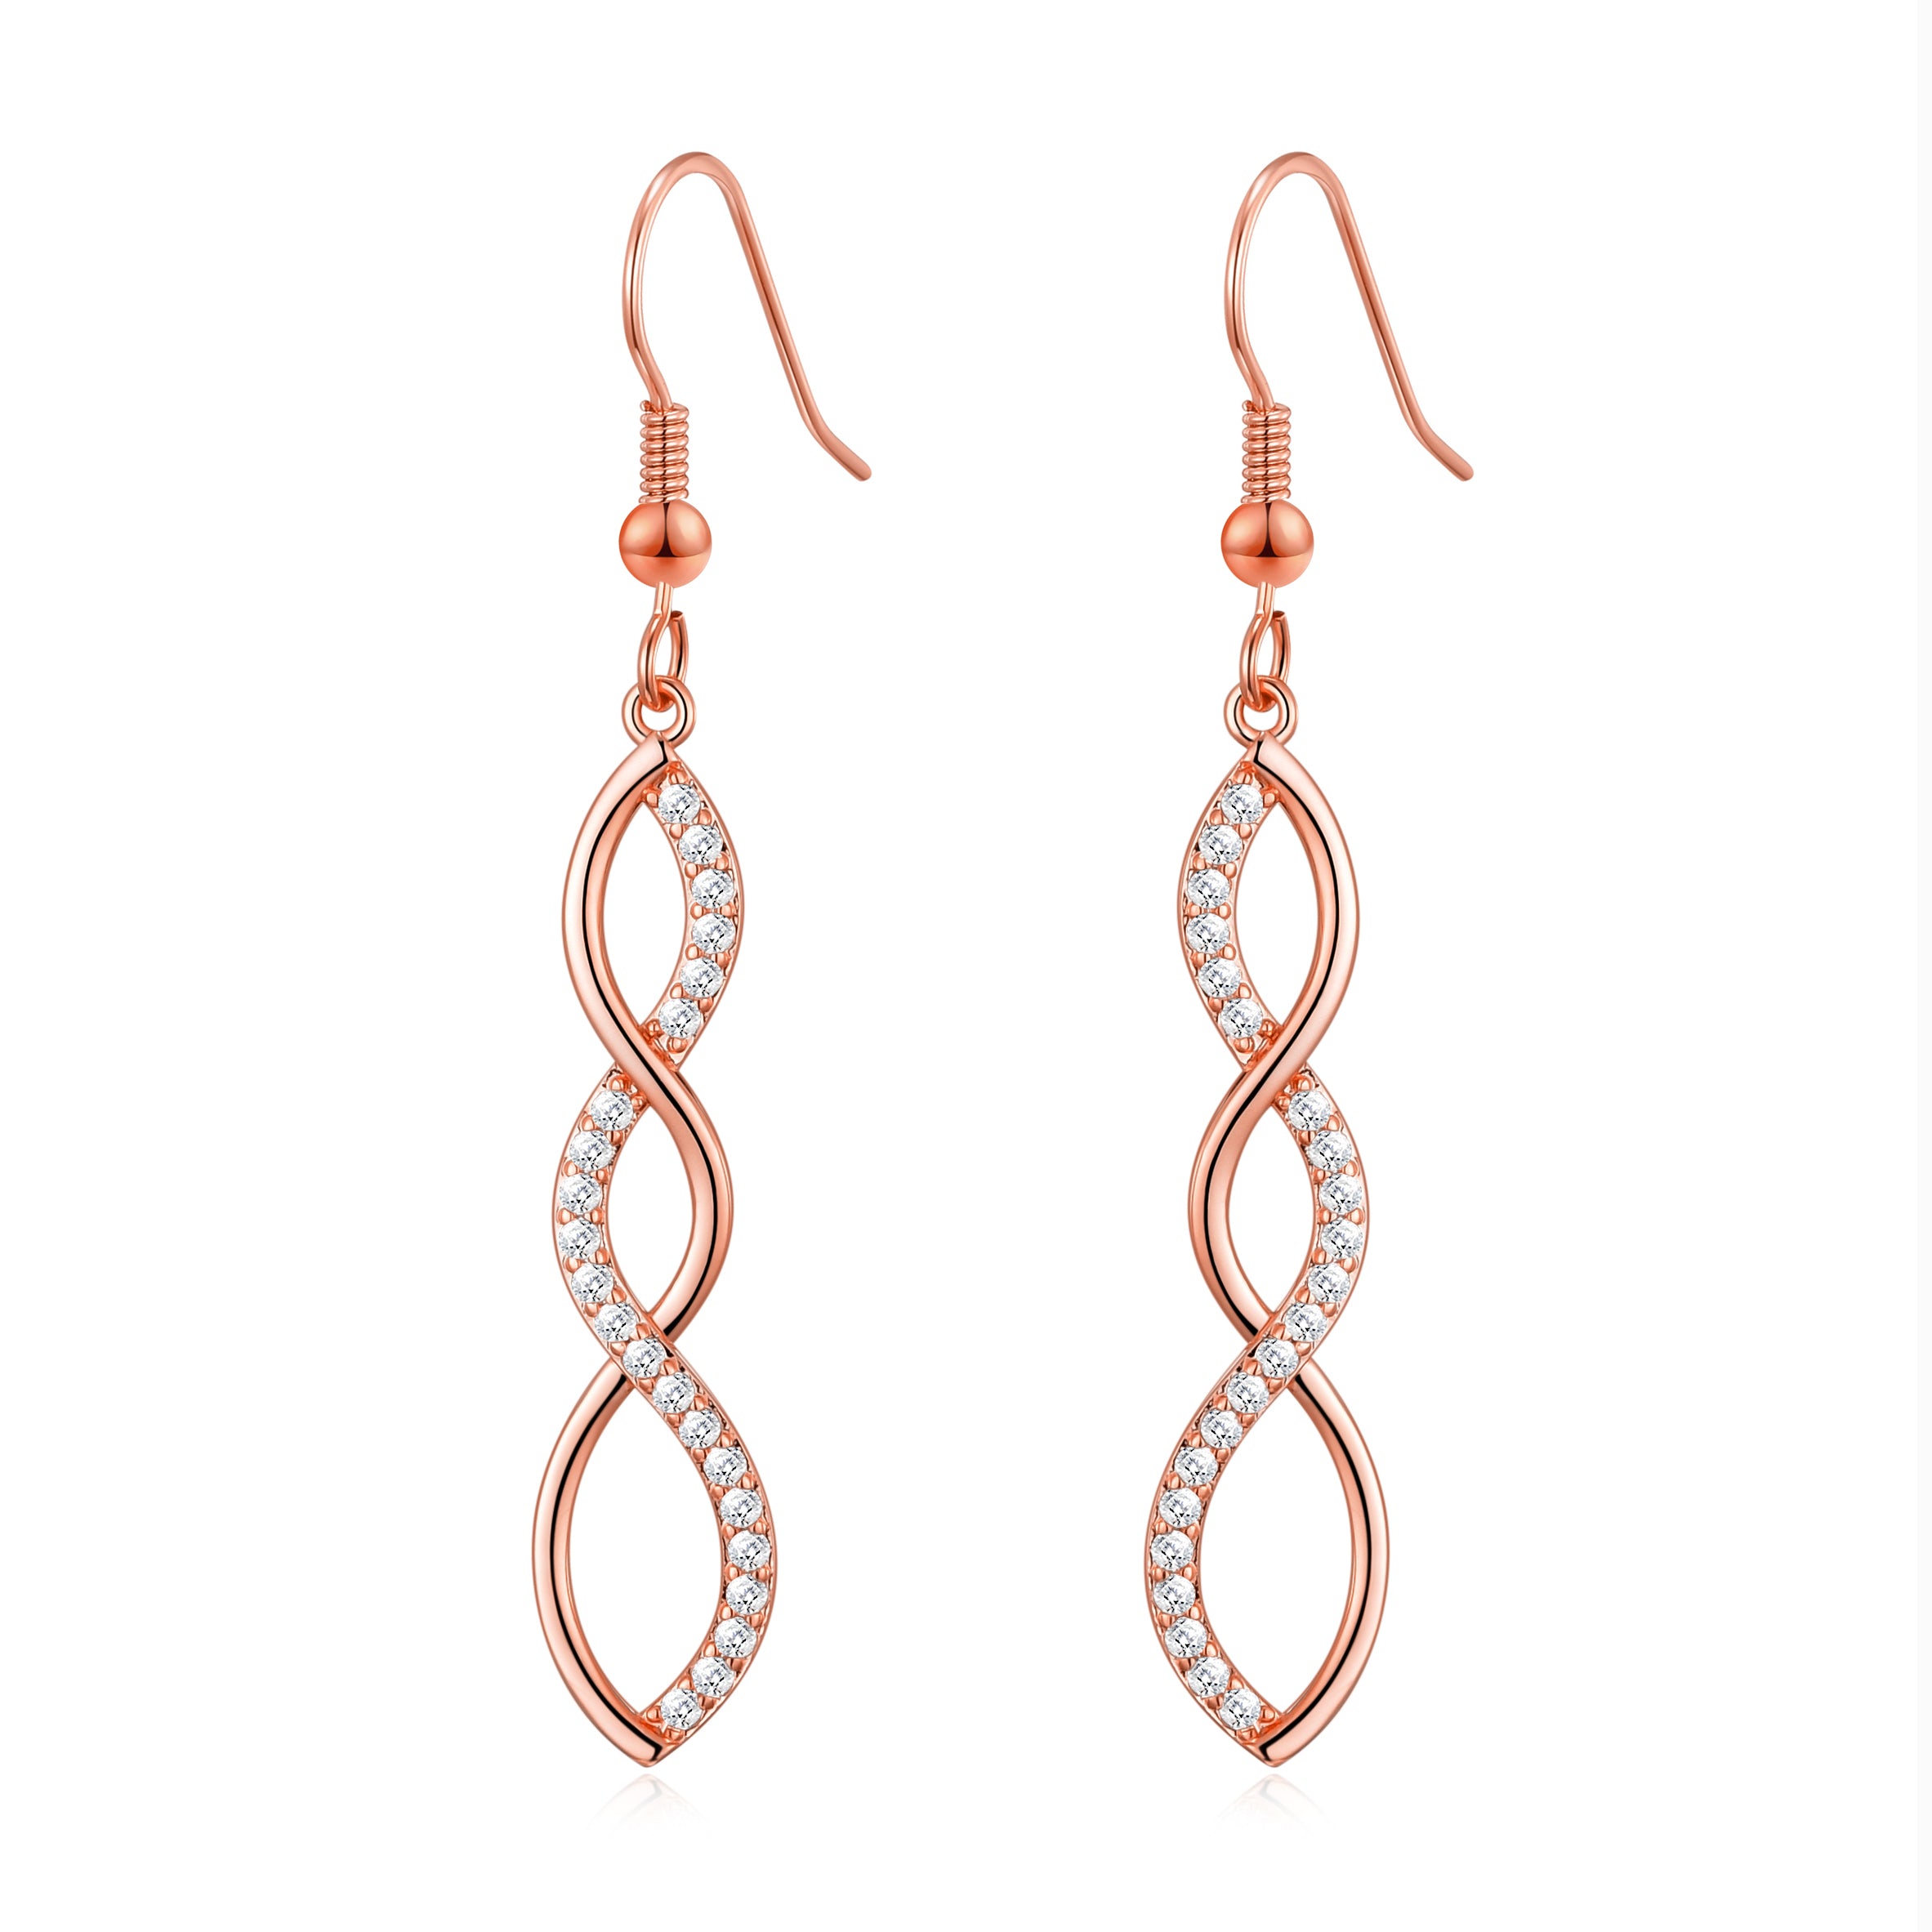 Rose Gold Plated Twist Drop Earrings Created with Zircondia® Crystals by Philip Jones Jewellery